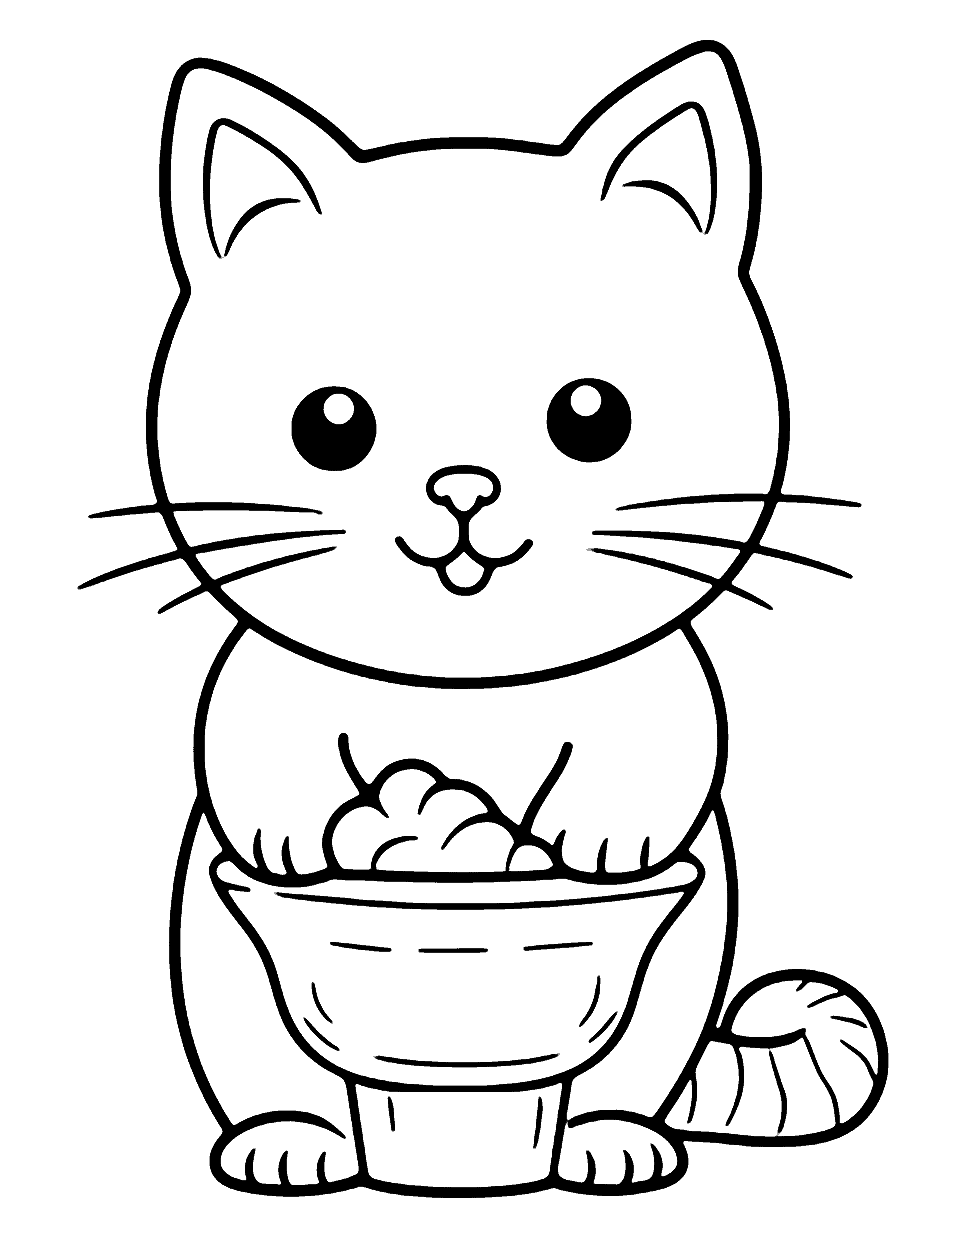 Kawaii Cat With Ice Cream Coloring Page - An adorable, chubby cat happily licking an oversized scoop of ice cream.